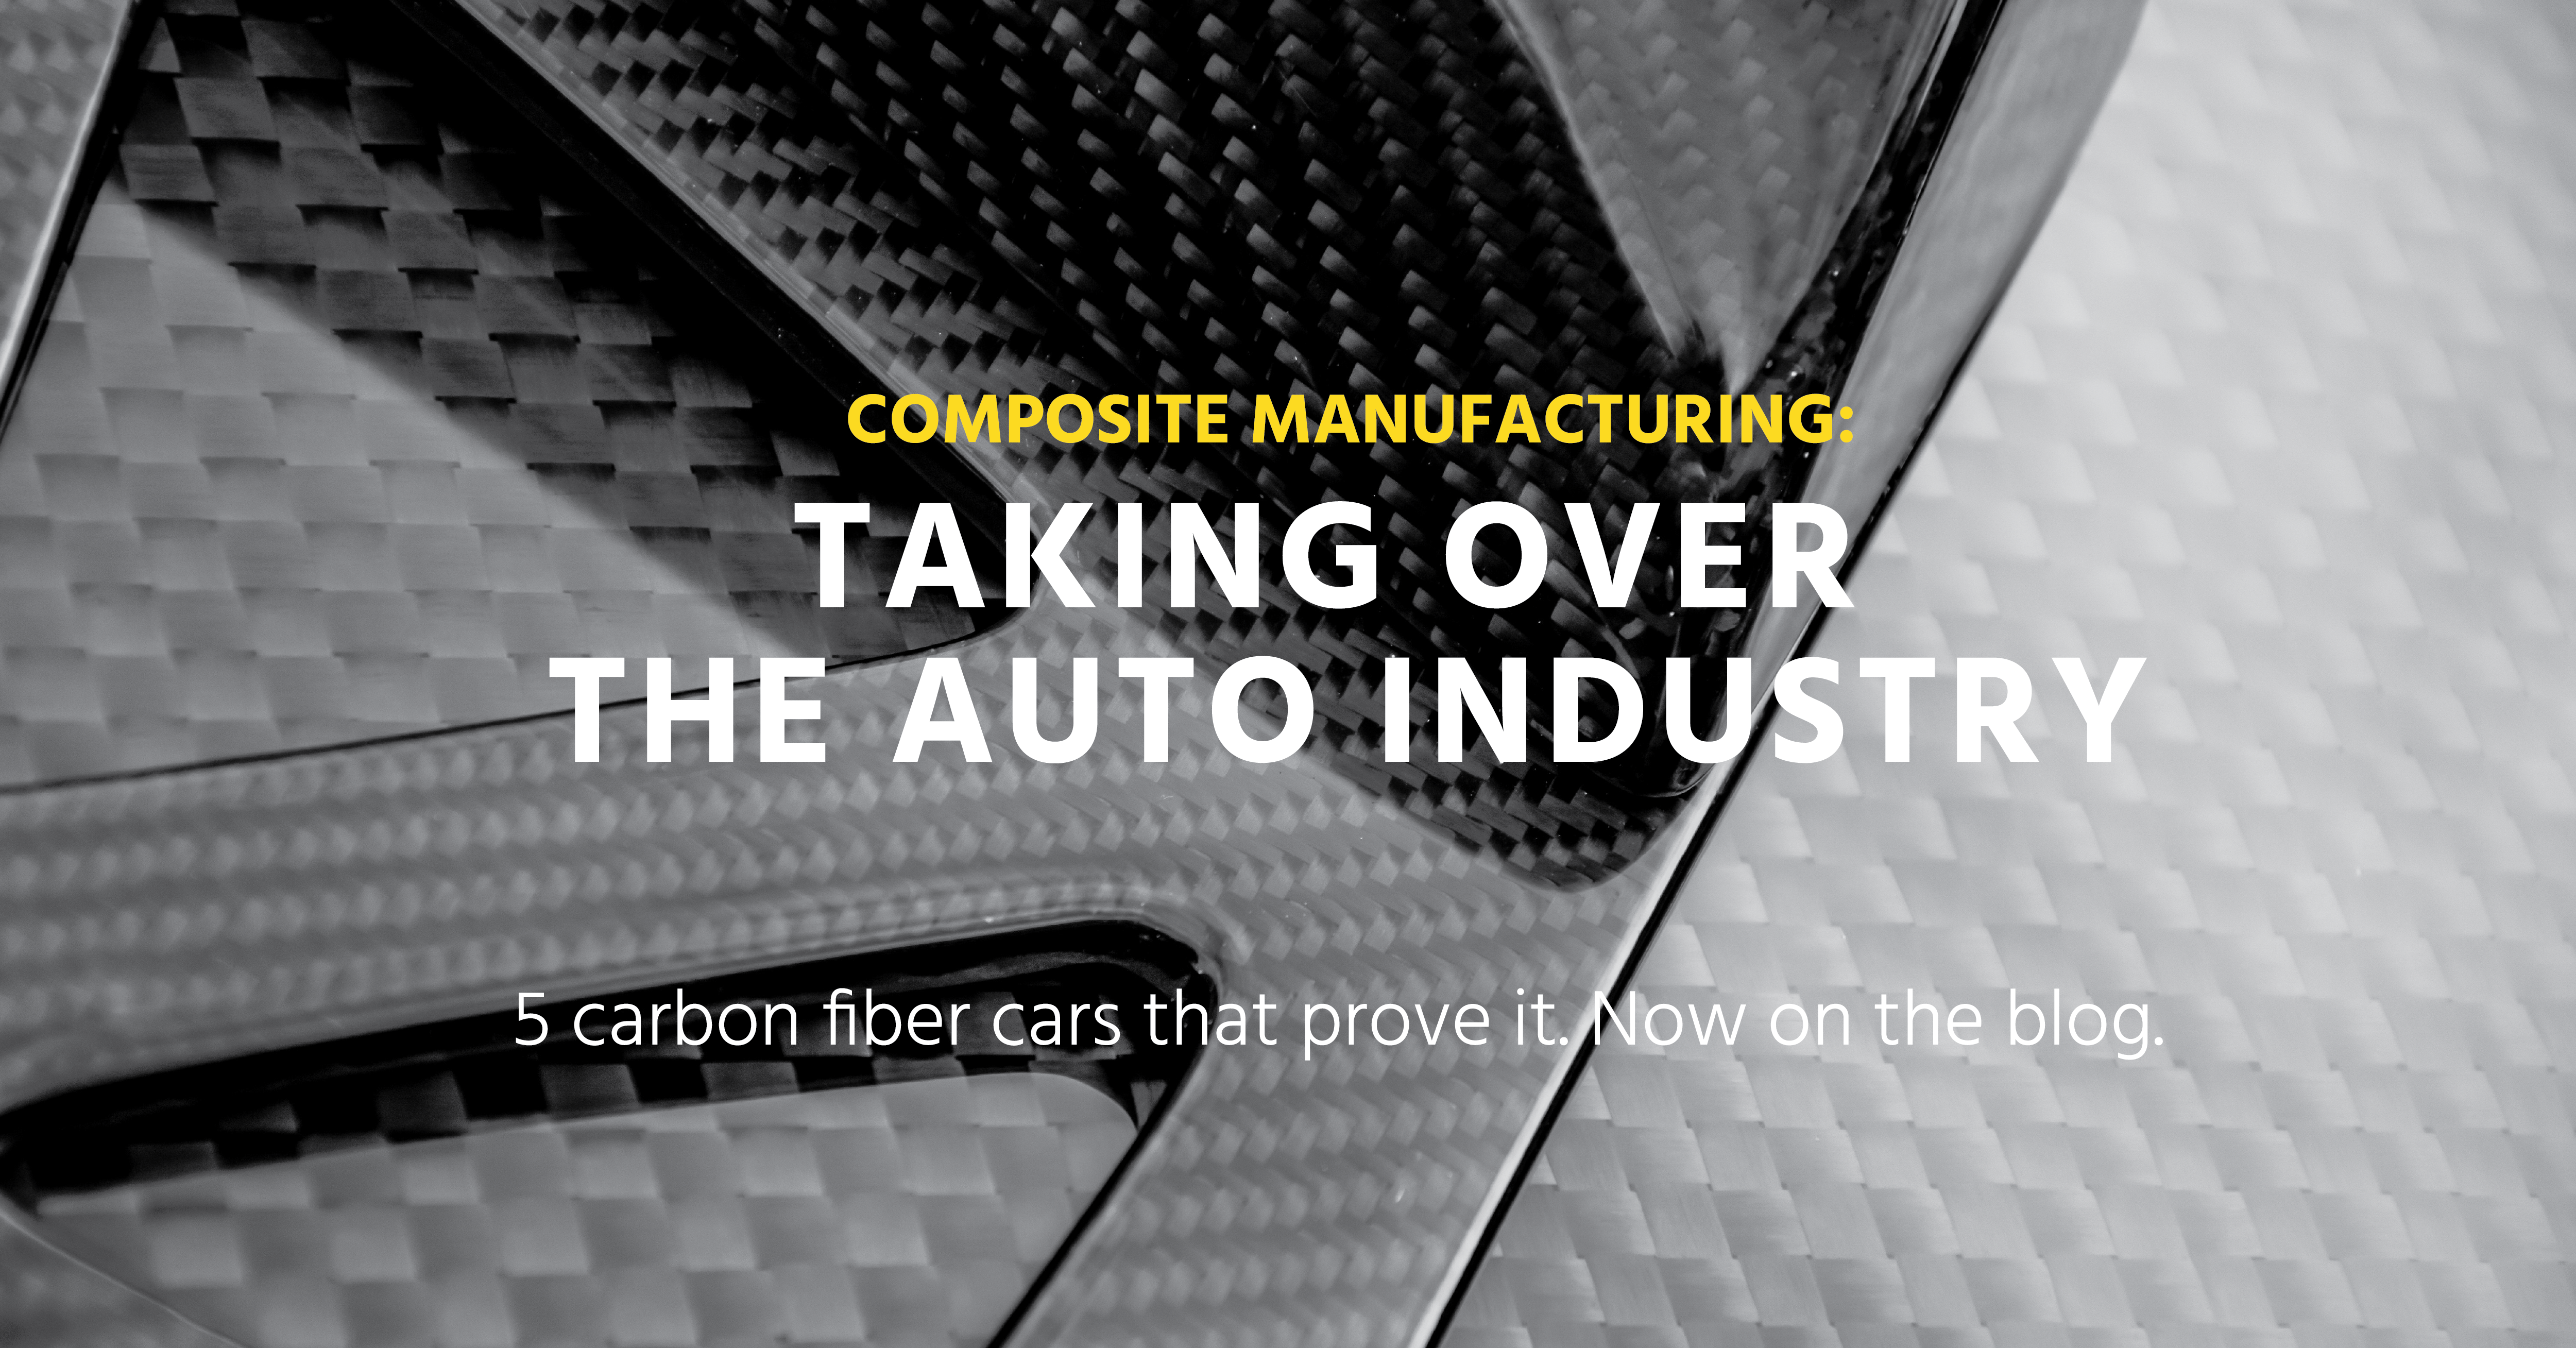 5 Carbon Fiber Cars That Prove Composite Manufacturing Is Taking Over